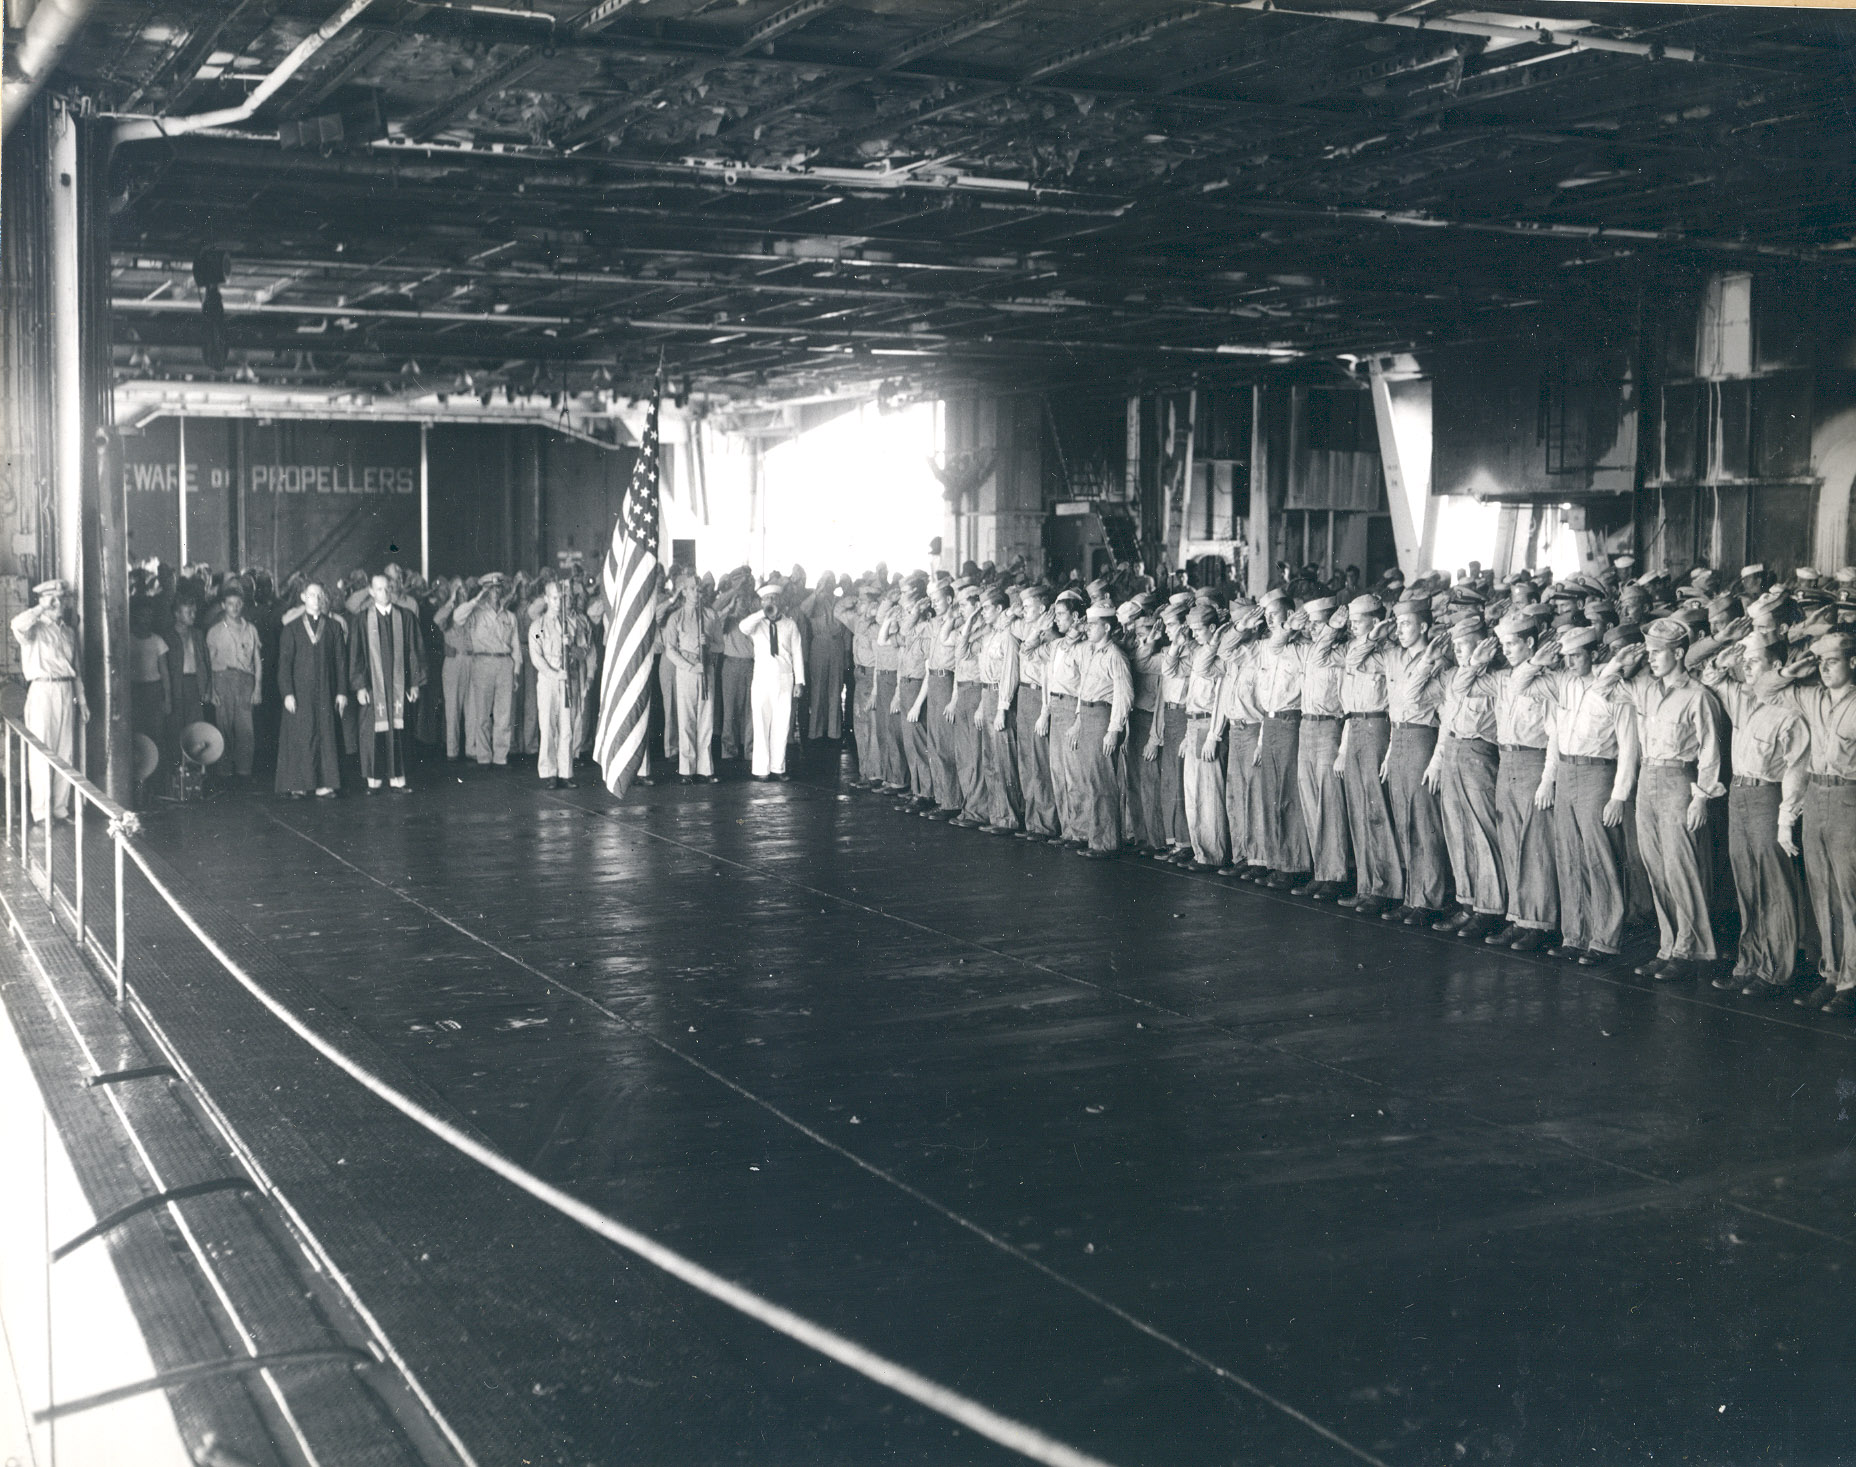 A burial party assembled on Intrepid's hangar deck in the Philippine Sea the day following the special attack of 25 Nov 1944, photo 1 of 5